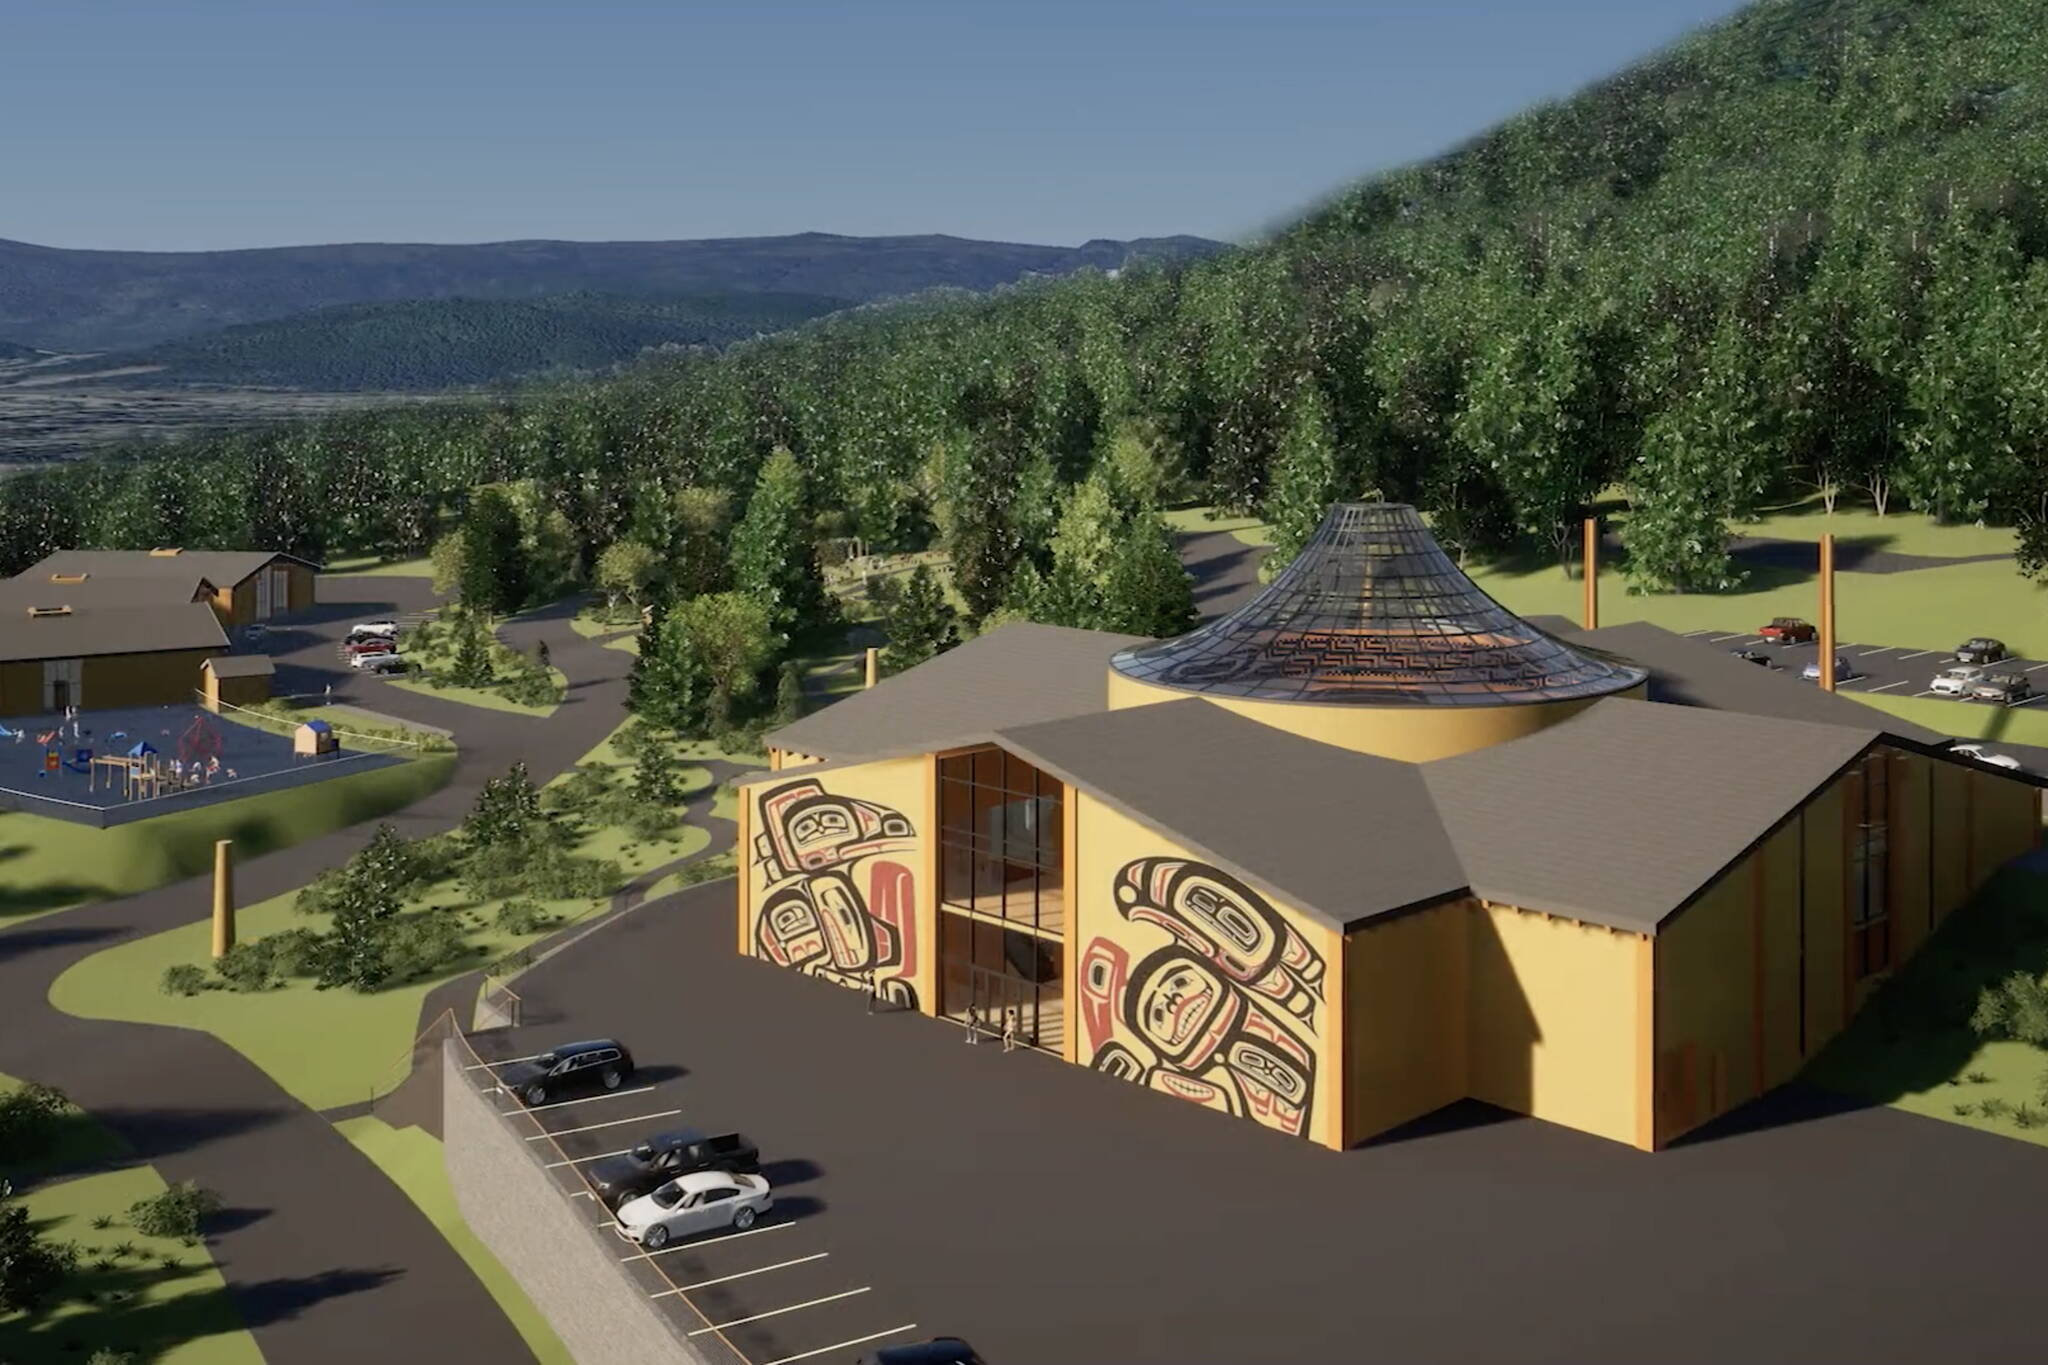 An illustration depicts a planned 12-acre education campus located on 42 acres in Juneau owned by the Central Council of the Tlingit and Haida Indian Tribes of Alaska, which was announced during the opening of its annual tribal assembly Wednesday. (Image courtesy of the Central Council of the Tlingit and Haida Indian Tribes of Alaska)(Image courtesy of the Central Council of the Tlingit and Haida Indian Tribes of Alaska)